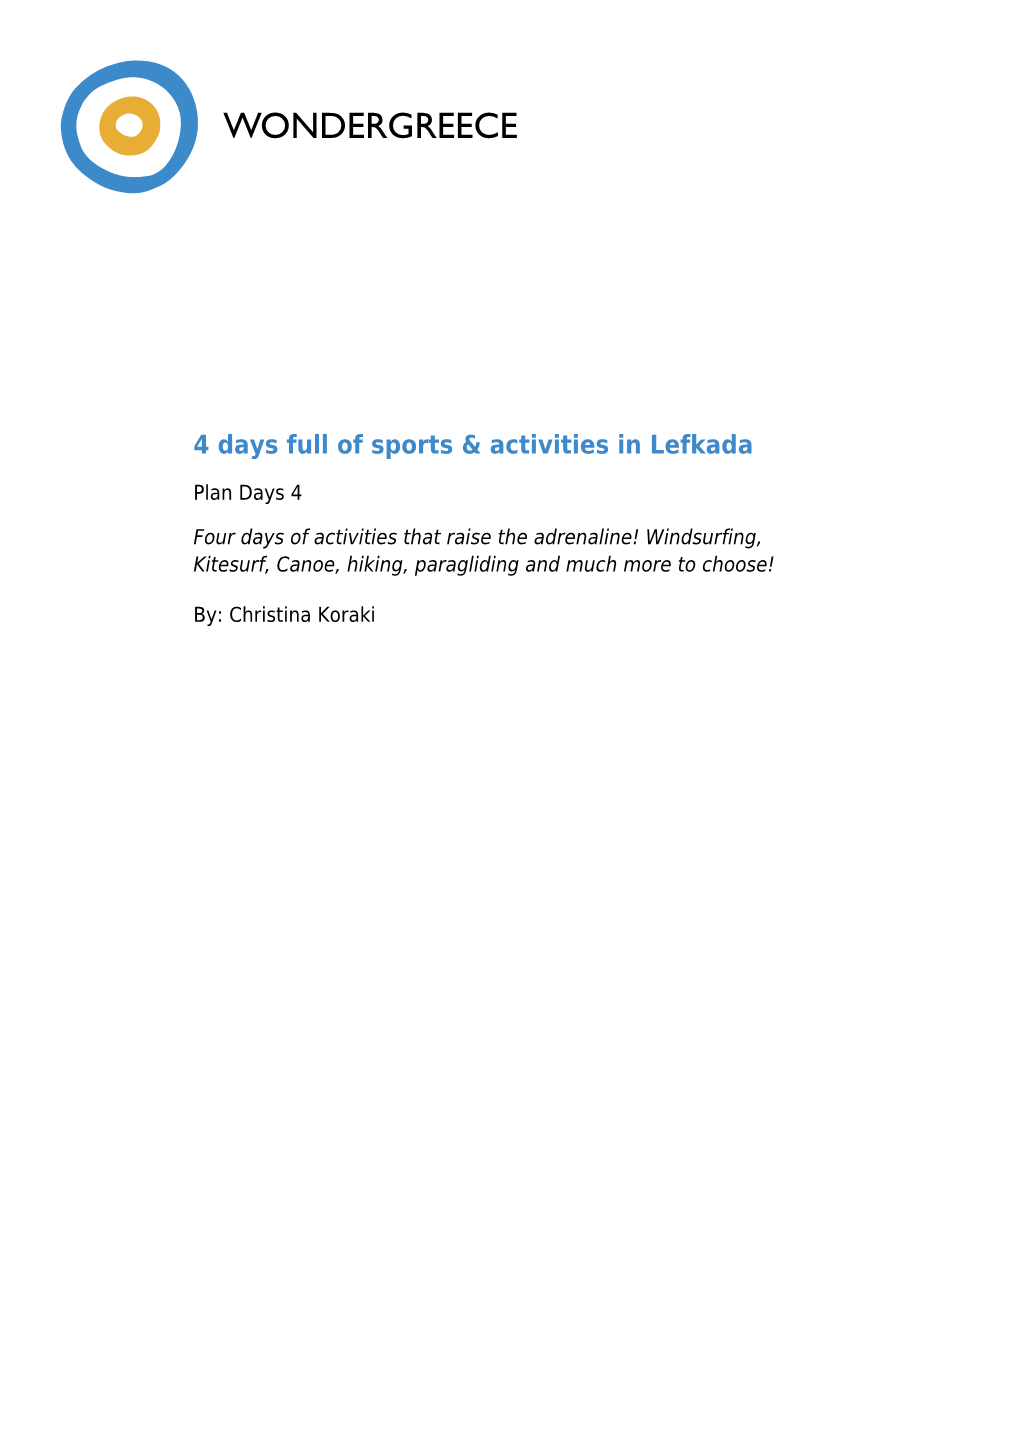 4 Days Full of Sports & Activities in Lefkada